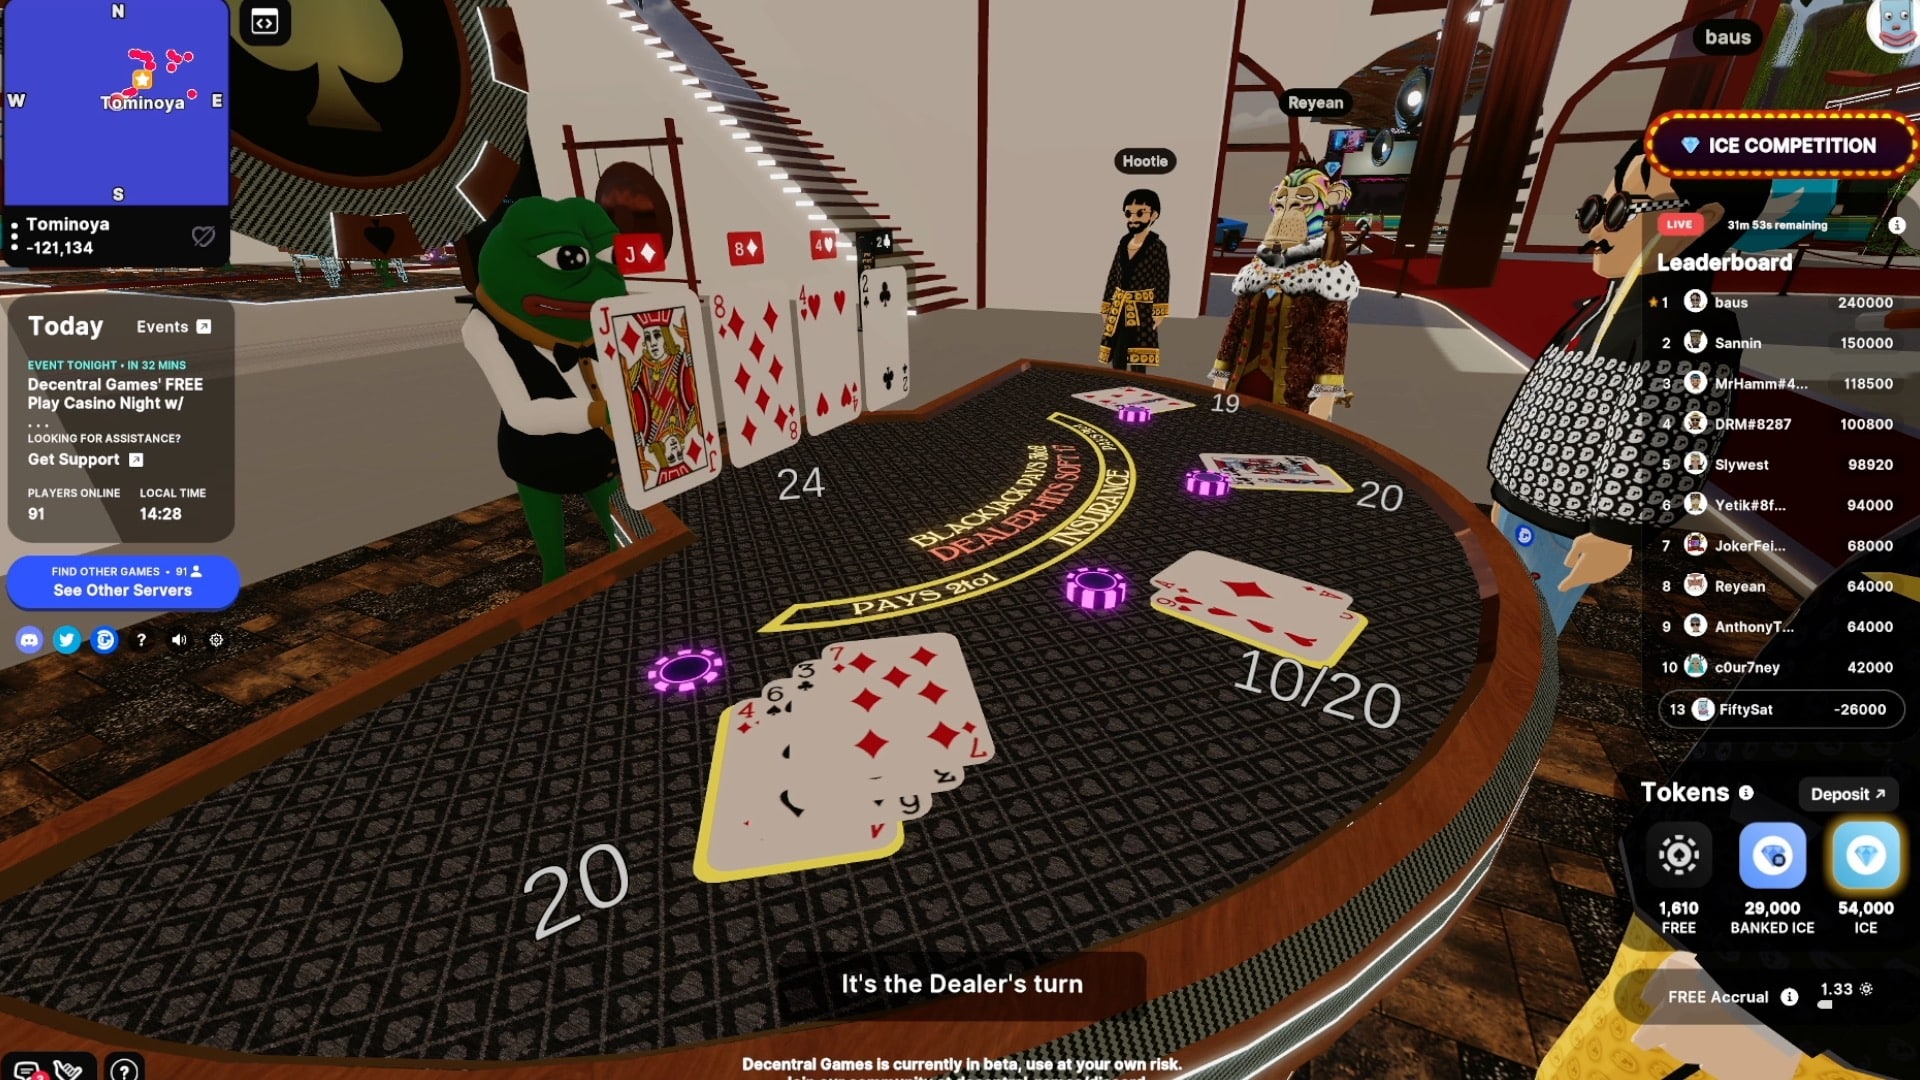 Playing blackjack in the DG Casino